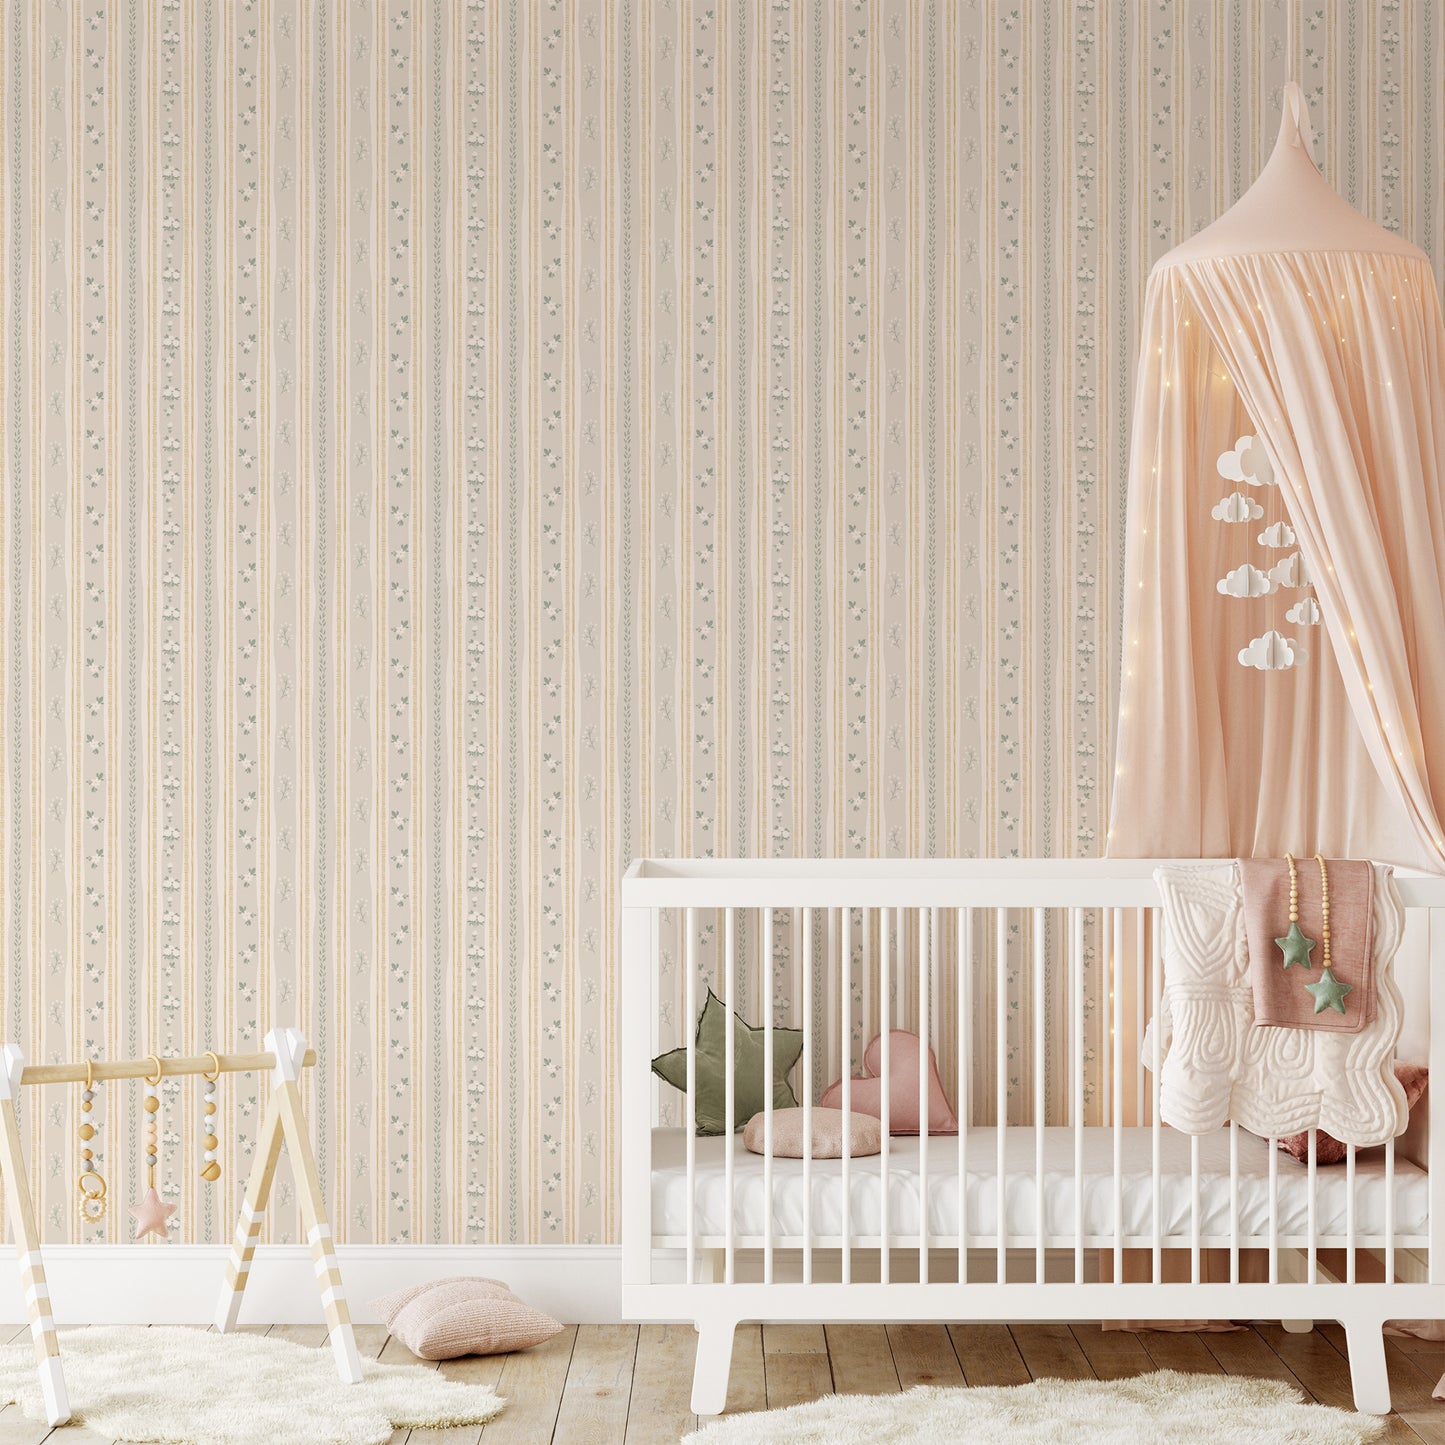 Nursery featuring Orchard Stripes Peel and Stick, Removable Wallpaper in Nude